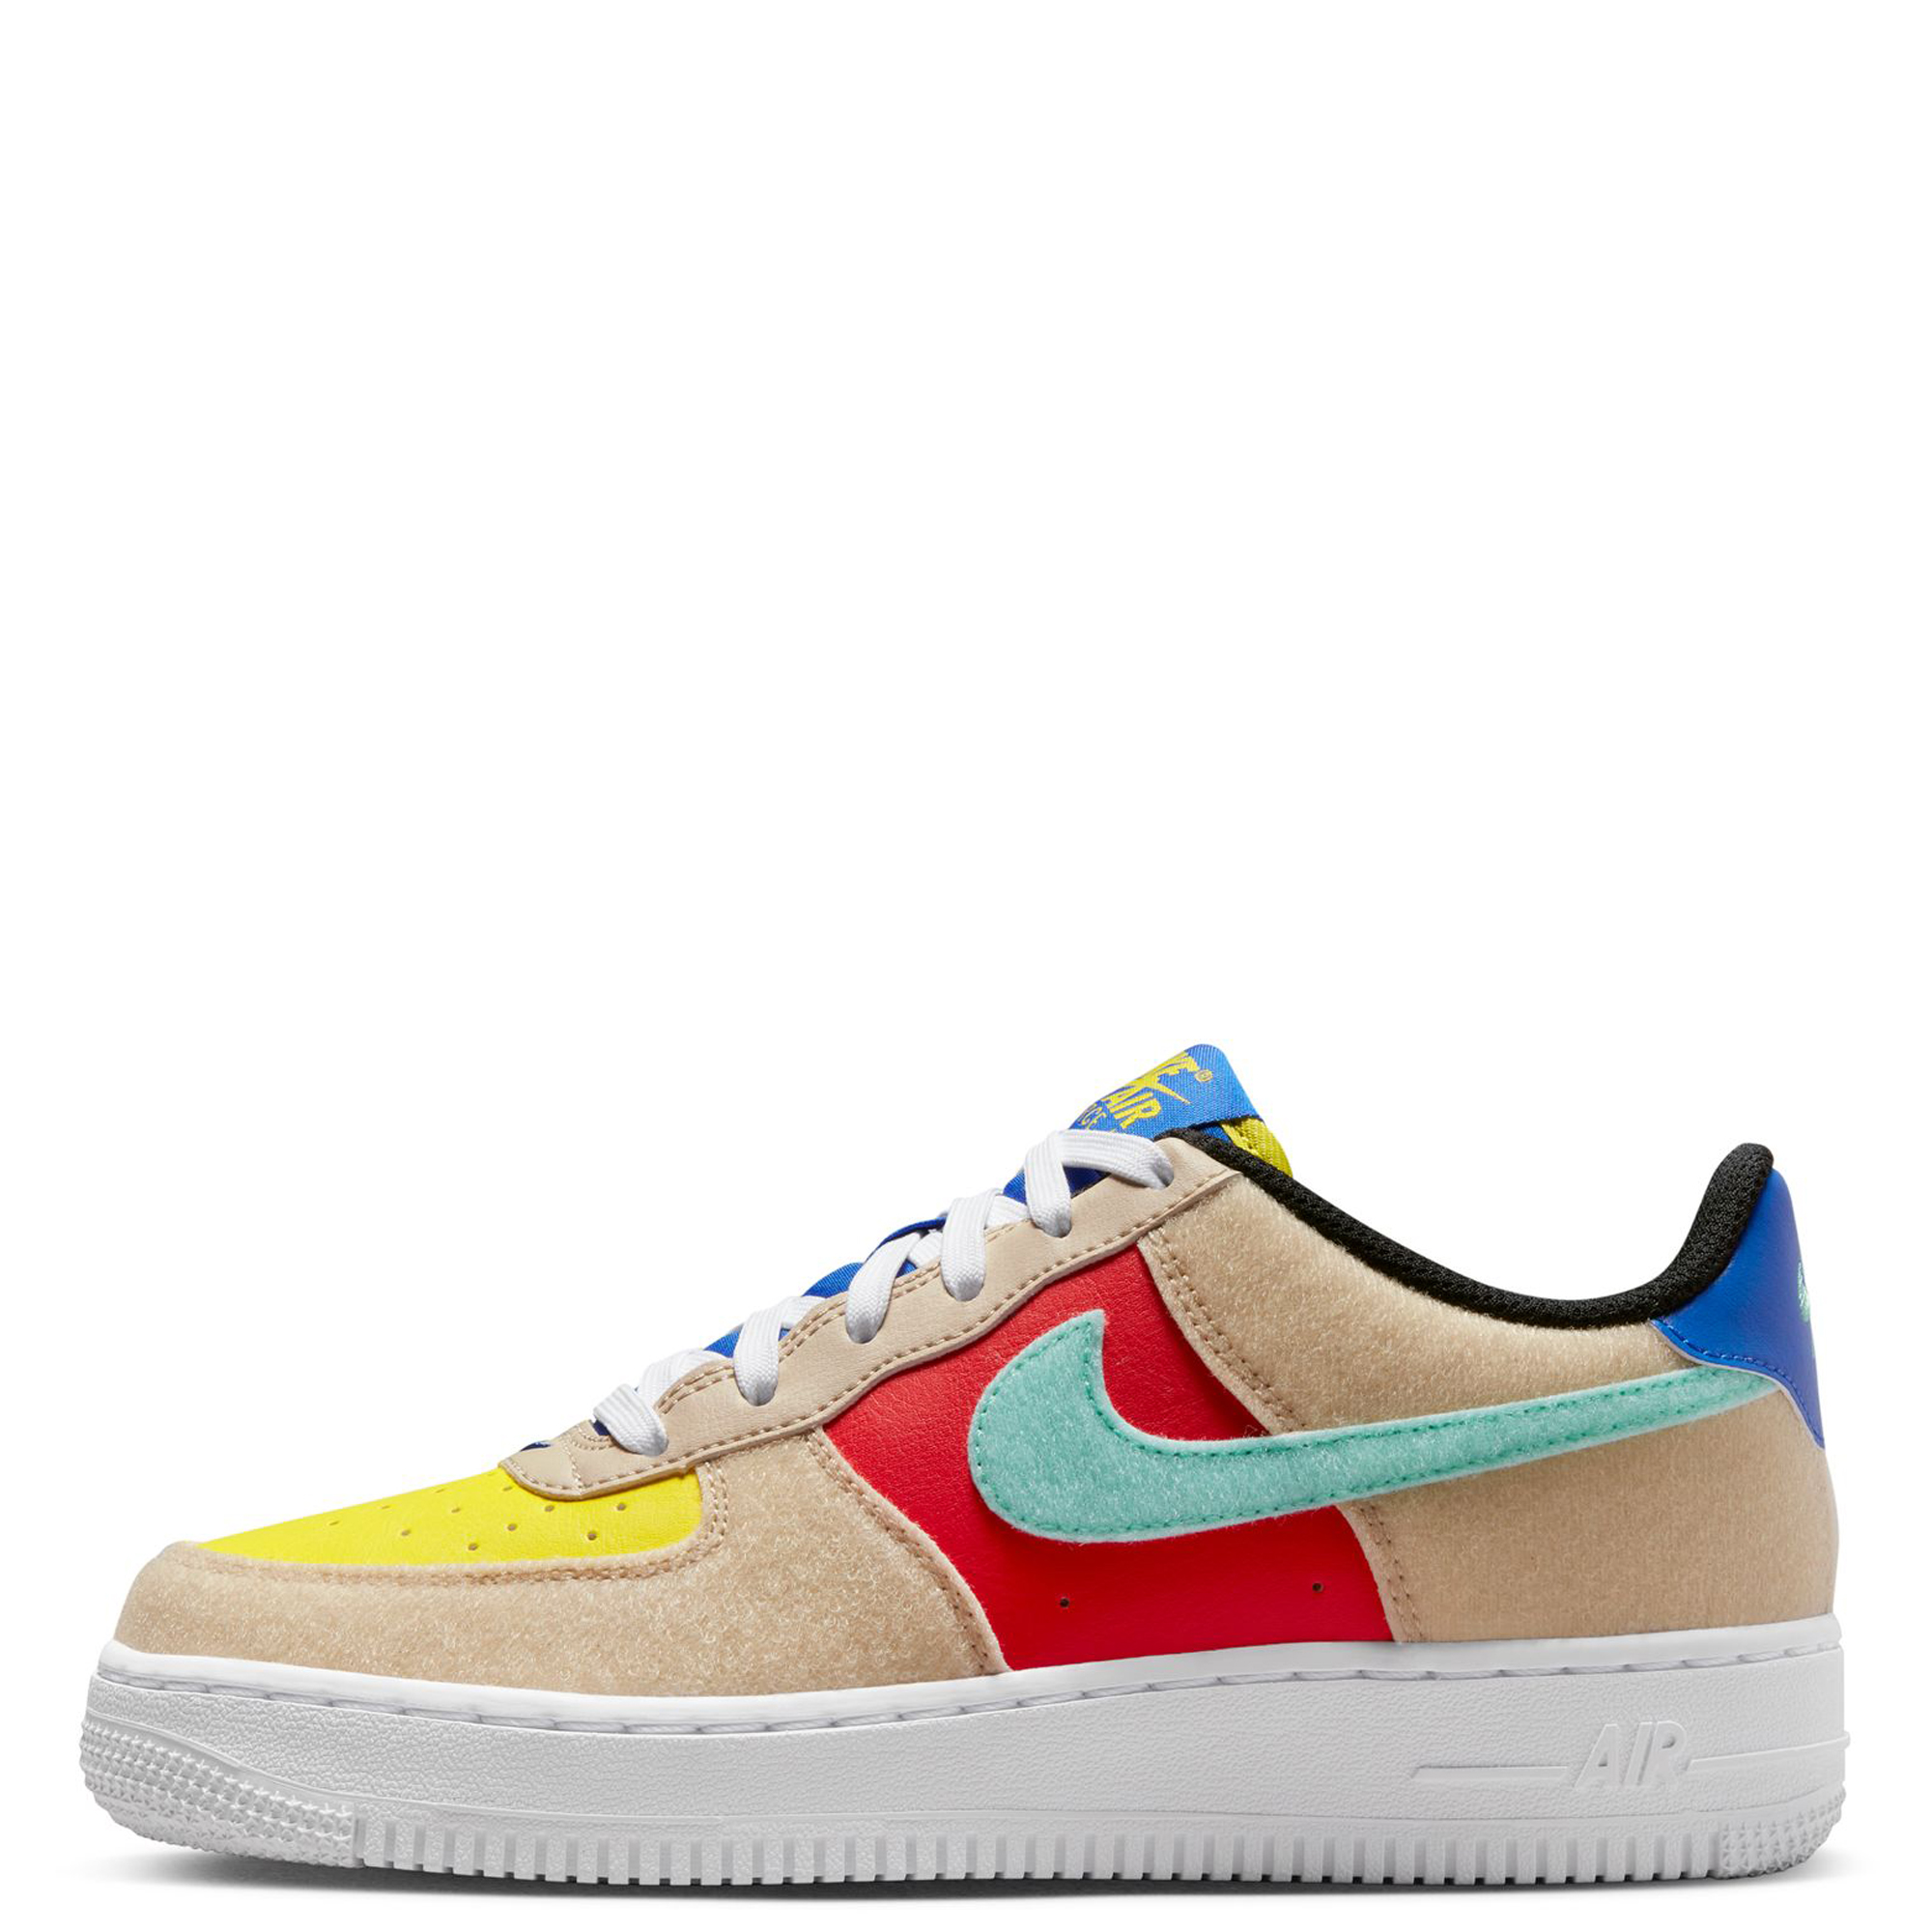 Nike Big Kids' Air Force 1 LV8 Casual Shoes Size 6.5 Leather University Red/Deep Royal Blue/Opti Yellow/White